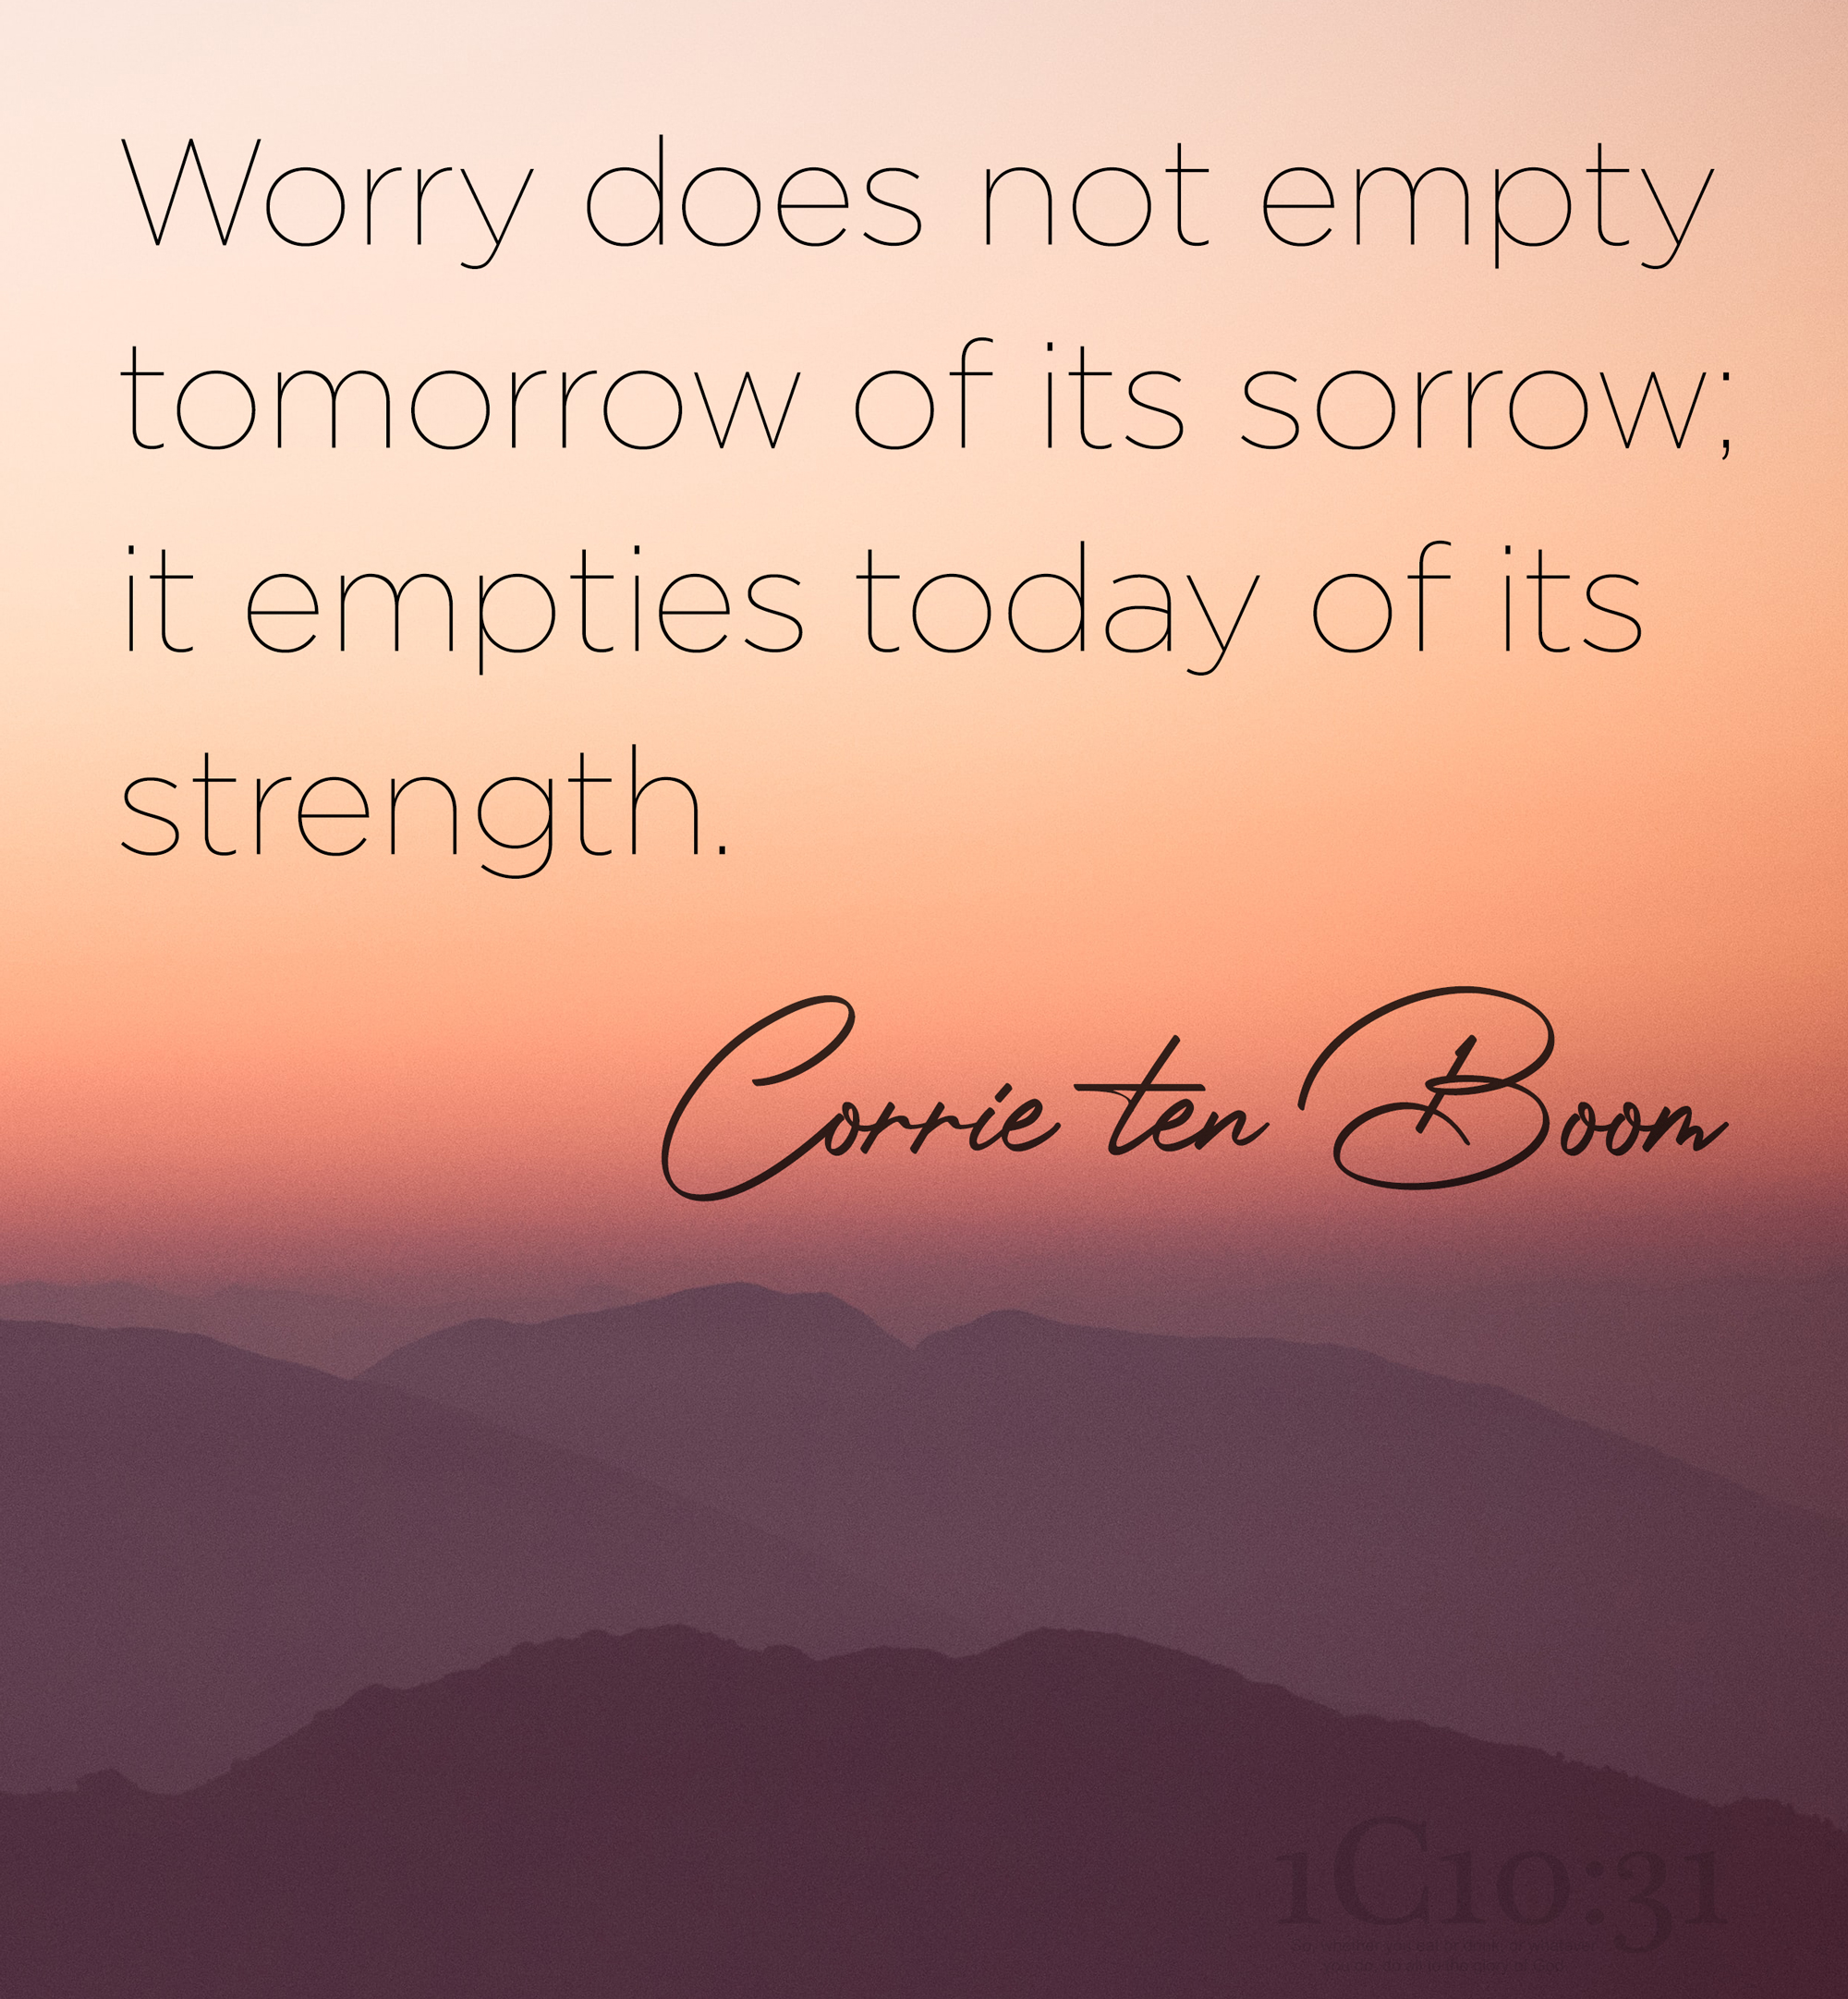 Worry does not empty tomorrow of its sorrow; it empties today of its strength.